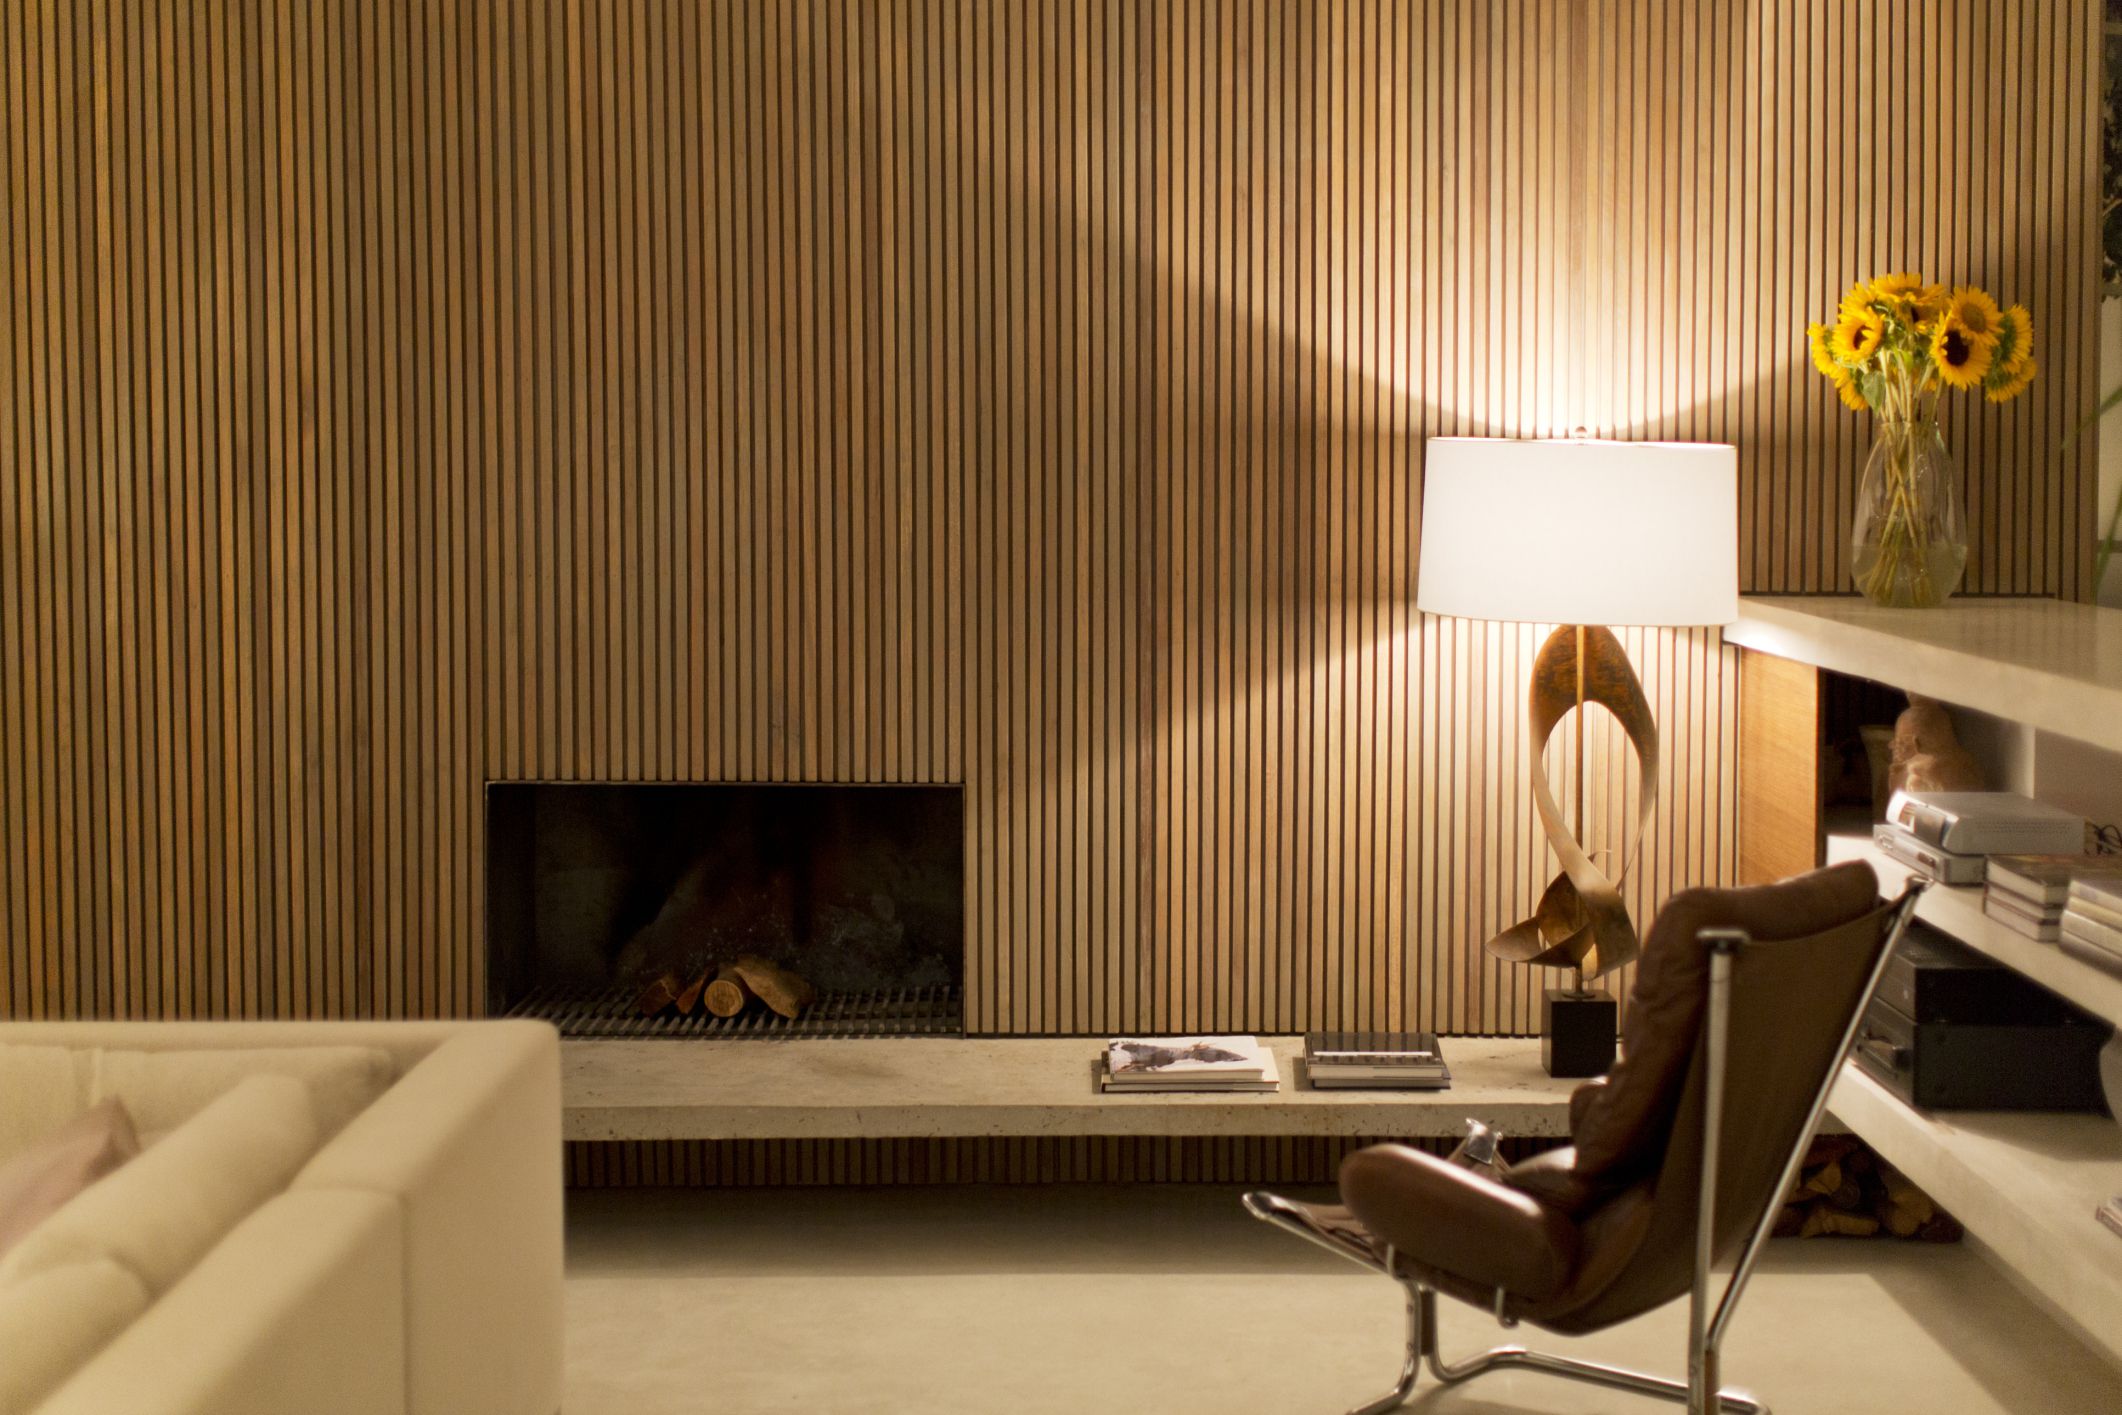  Wood Paneling Ideas Modern with Simple Decor